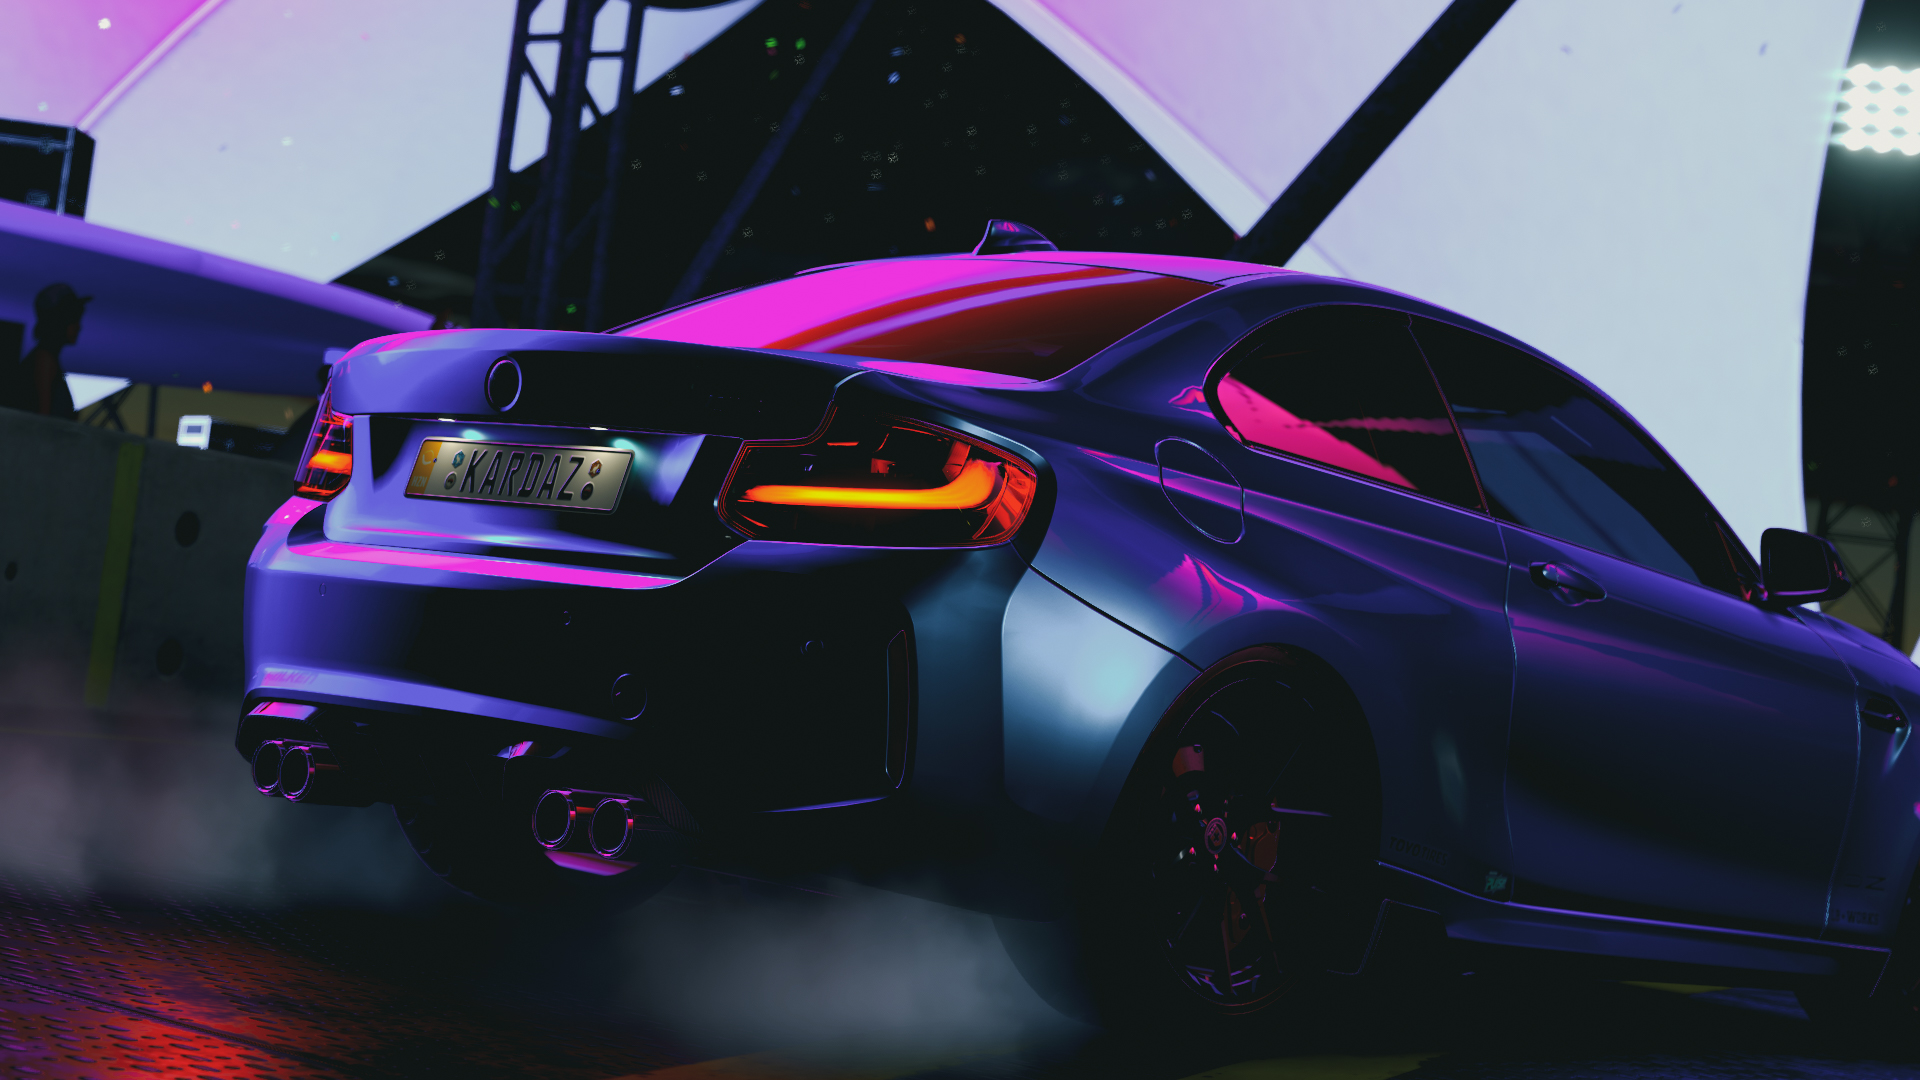 General 1920x1080 Forza Horizon 3 screen shot PC gaming BMW BMW 2 Series car PlaygroundGames German cars video games rear view licence plates taillights video game art CGI